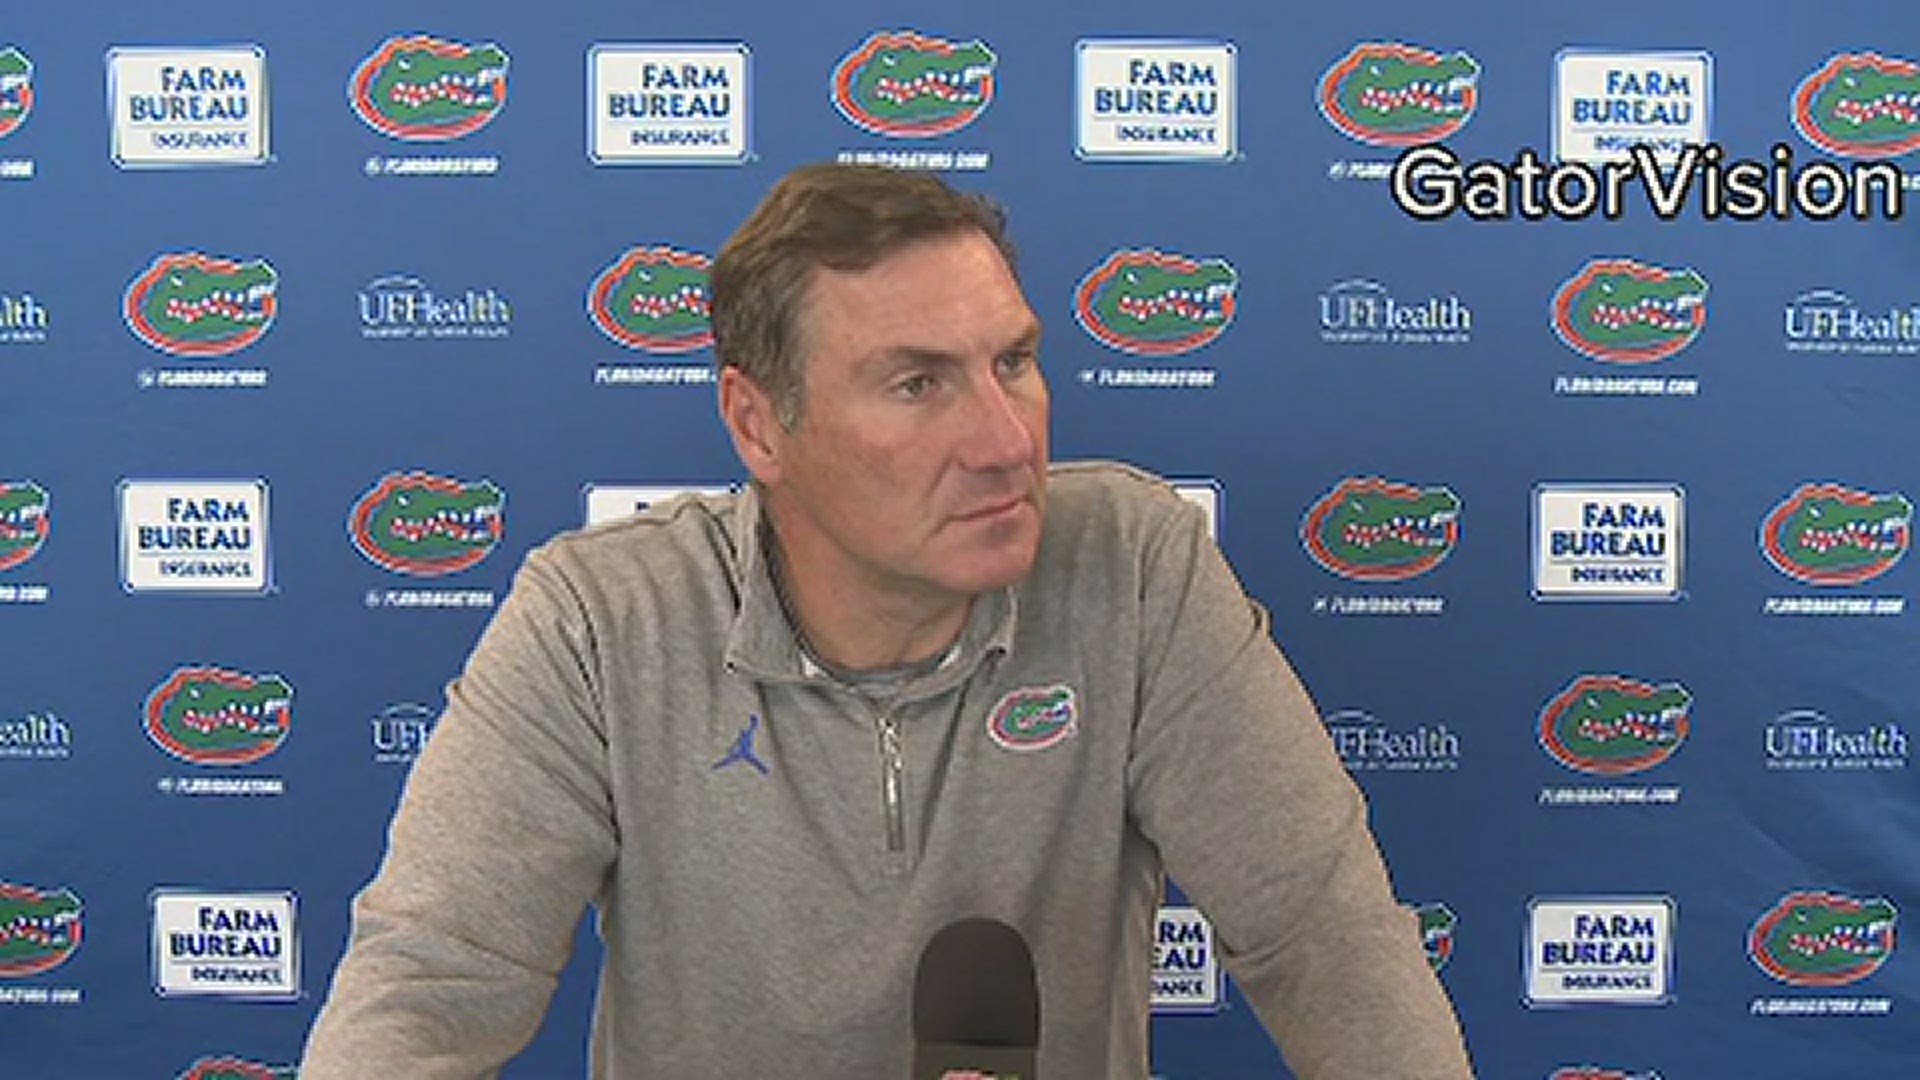 Following Florida's loss to Texas A&M, Gators head coach Dan Mullen said he wanted fans to "pack The Swamp" against LSU. He deflected those comments Monday.